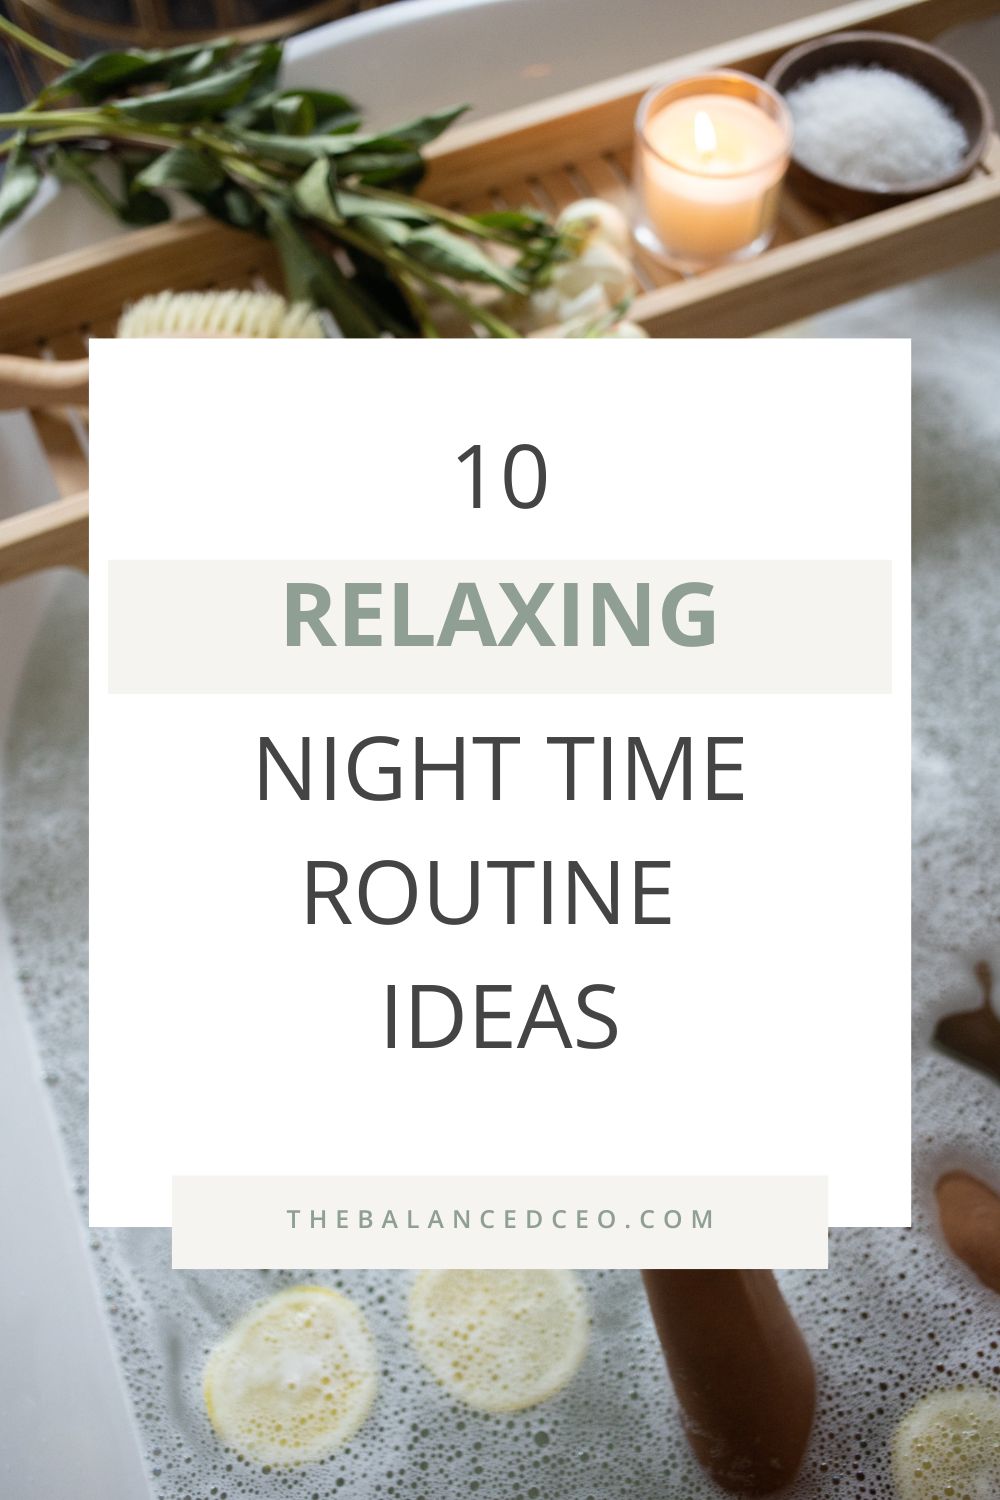 10 Relaxing Night Time Routine Ideas